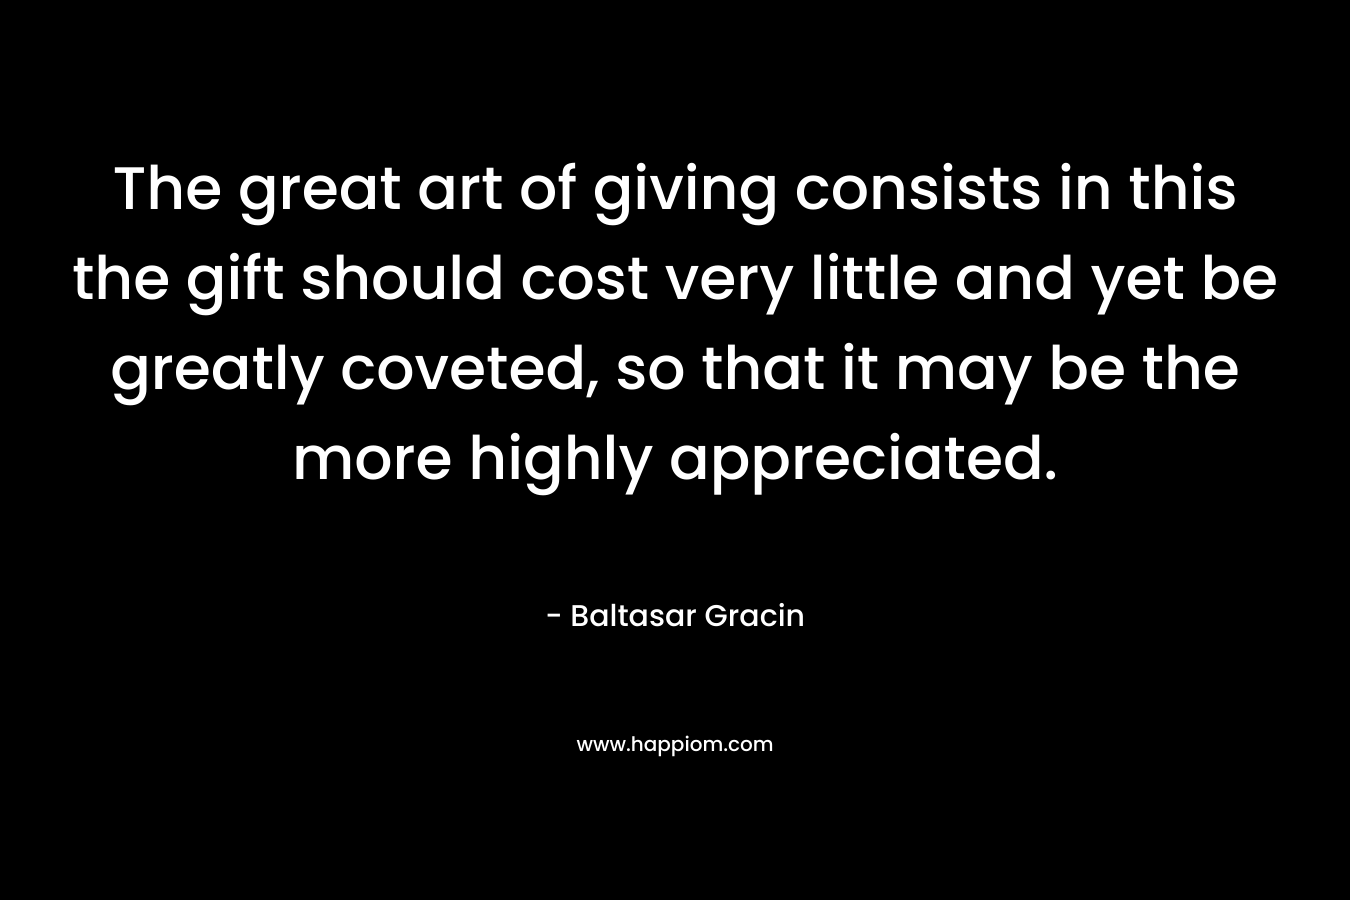 The great art of giving consists in this the gift should cost very little and yet be greatly coveted, so that it may be the more highly appreciated. – Baltasar Gracin